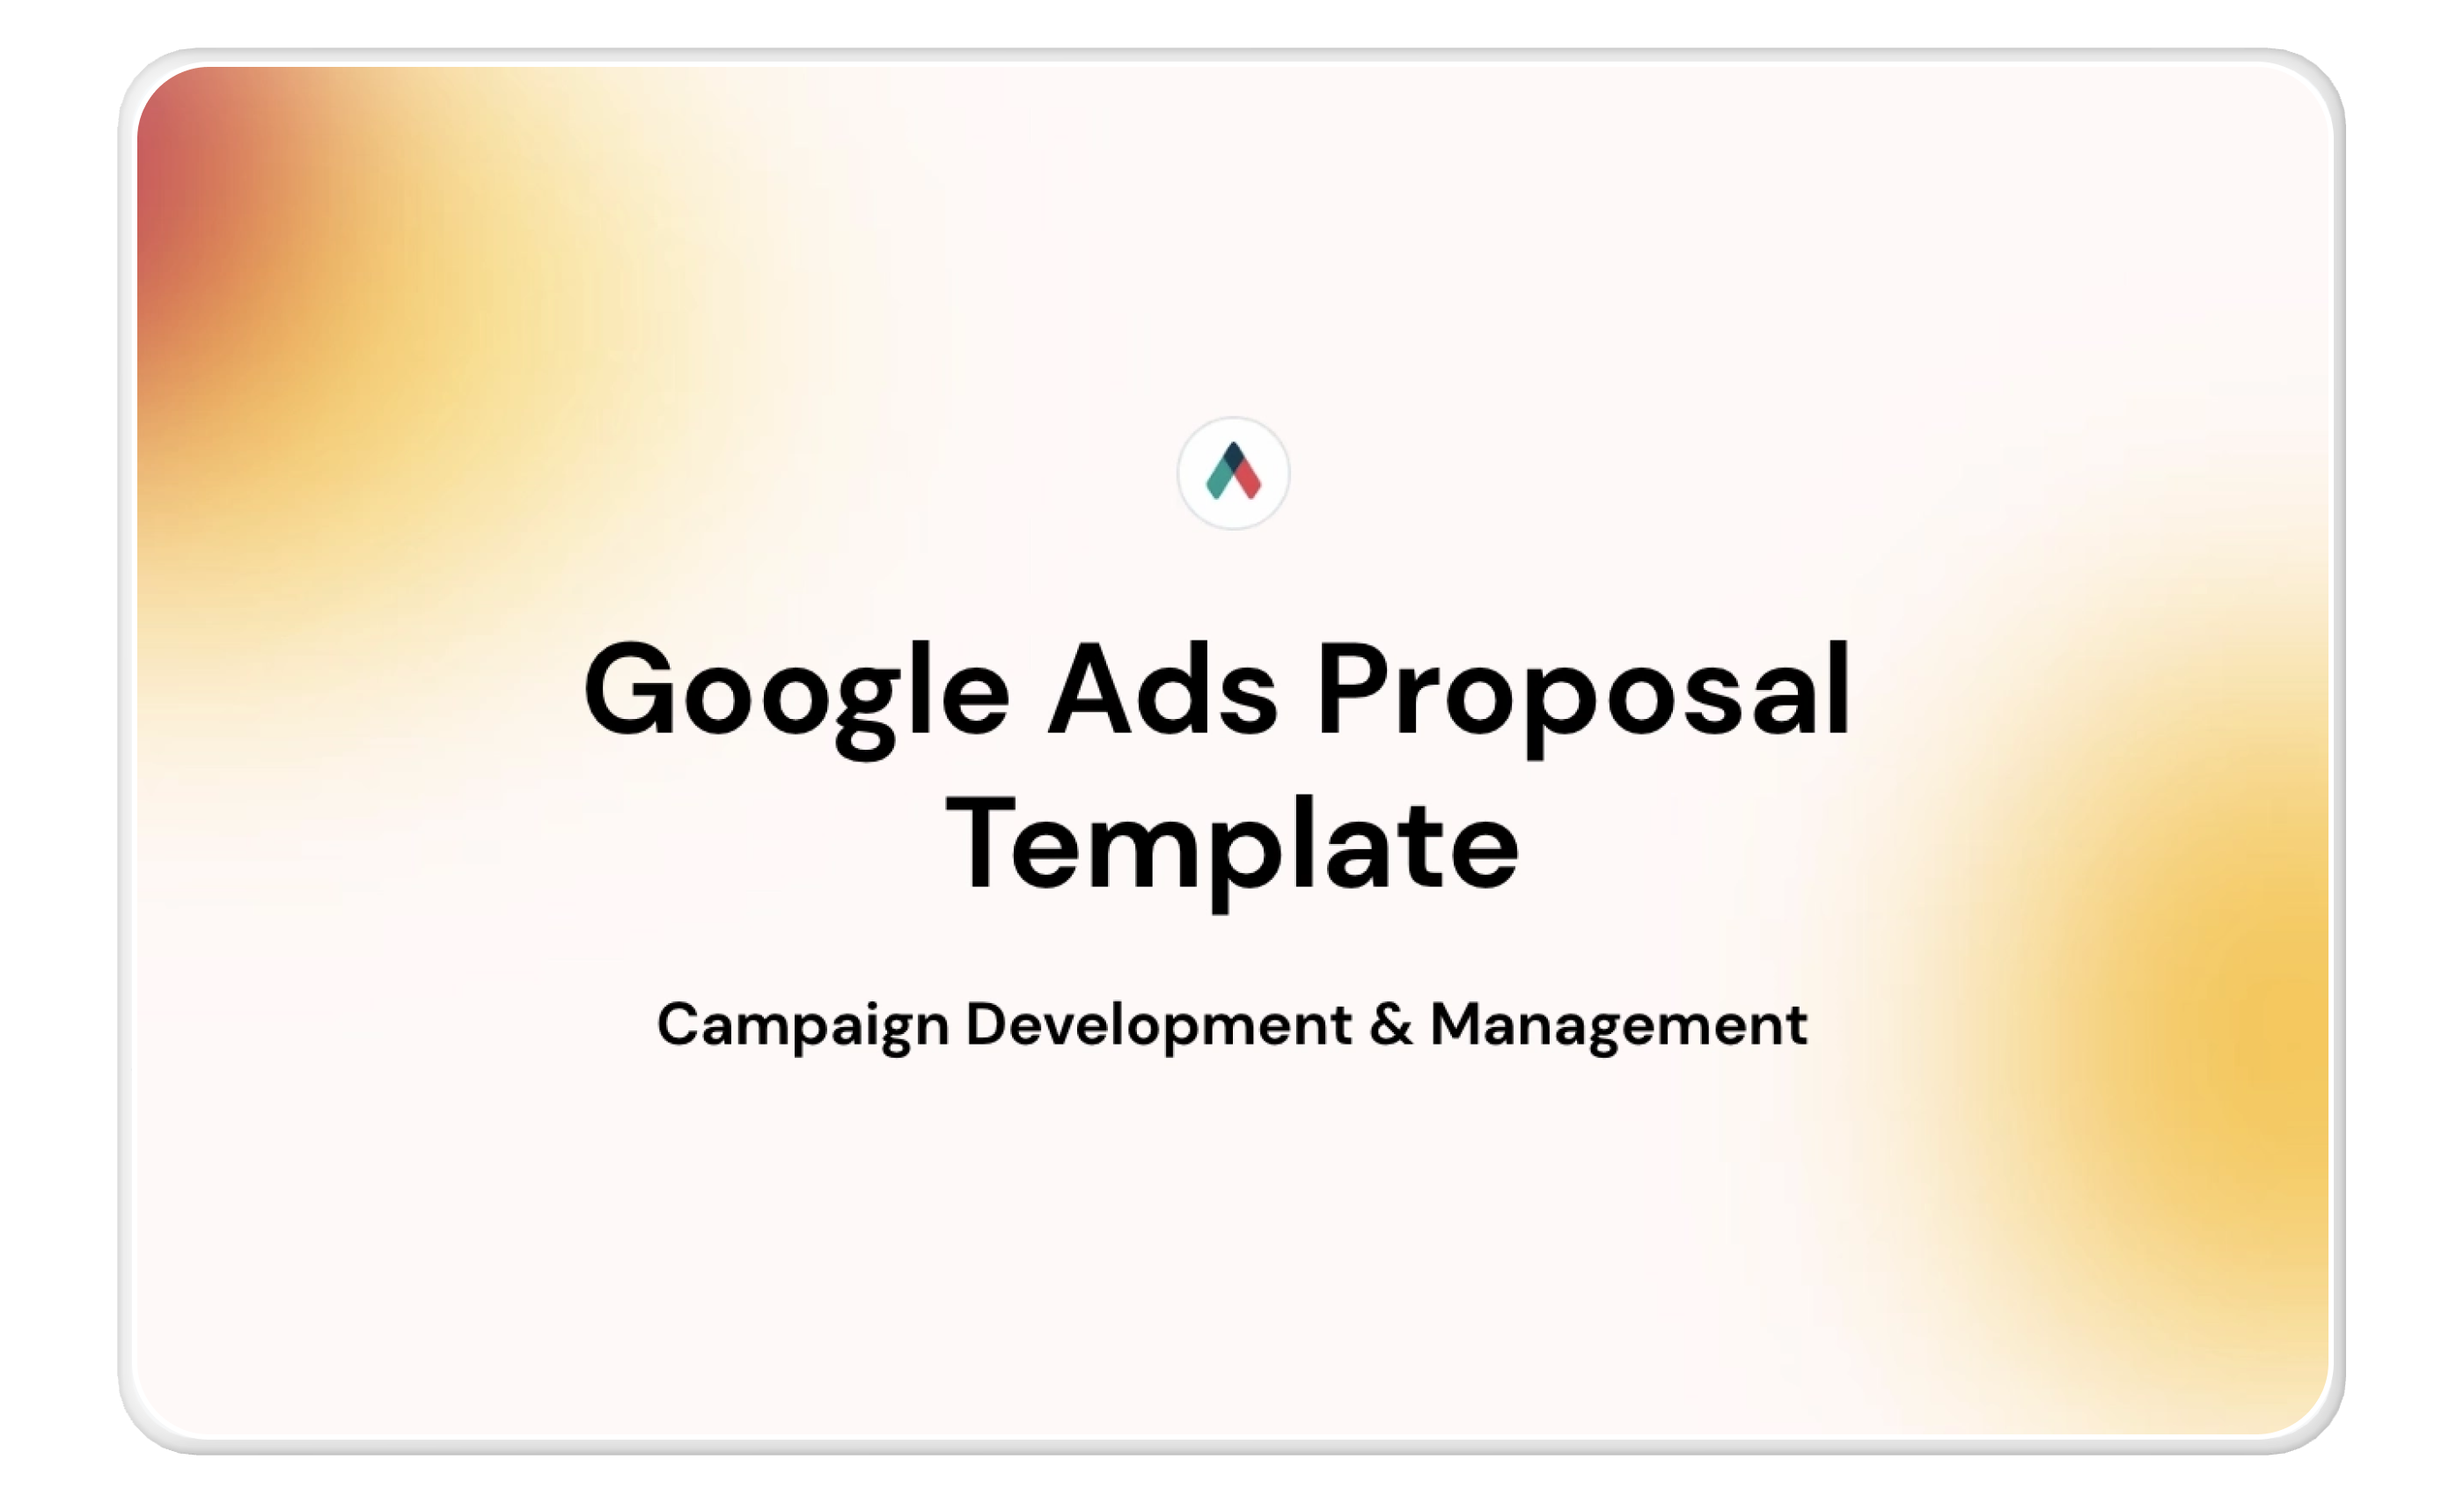 Google Ads Proposal Example